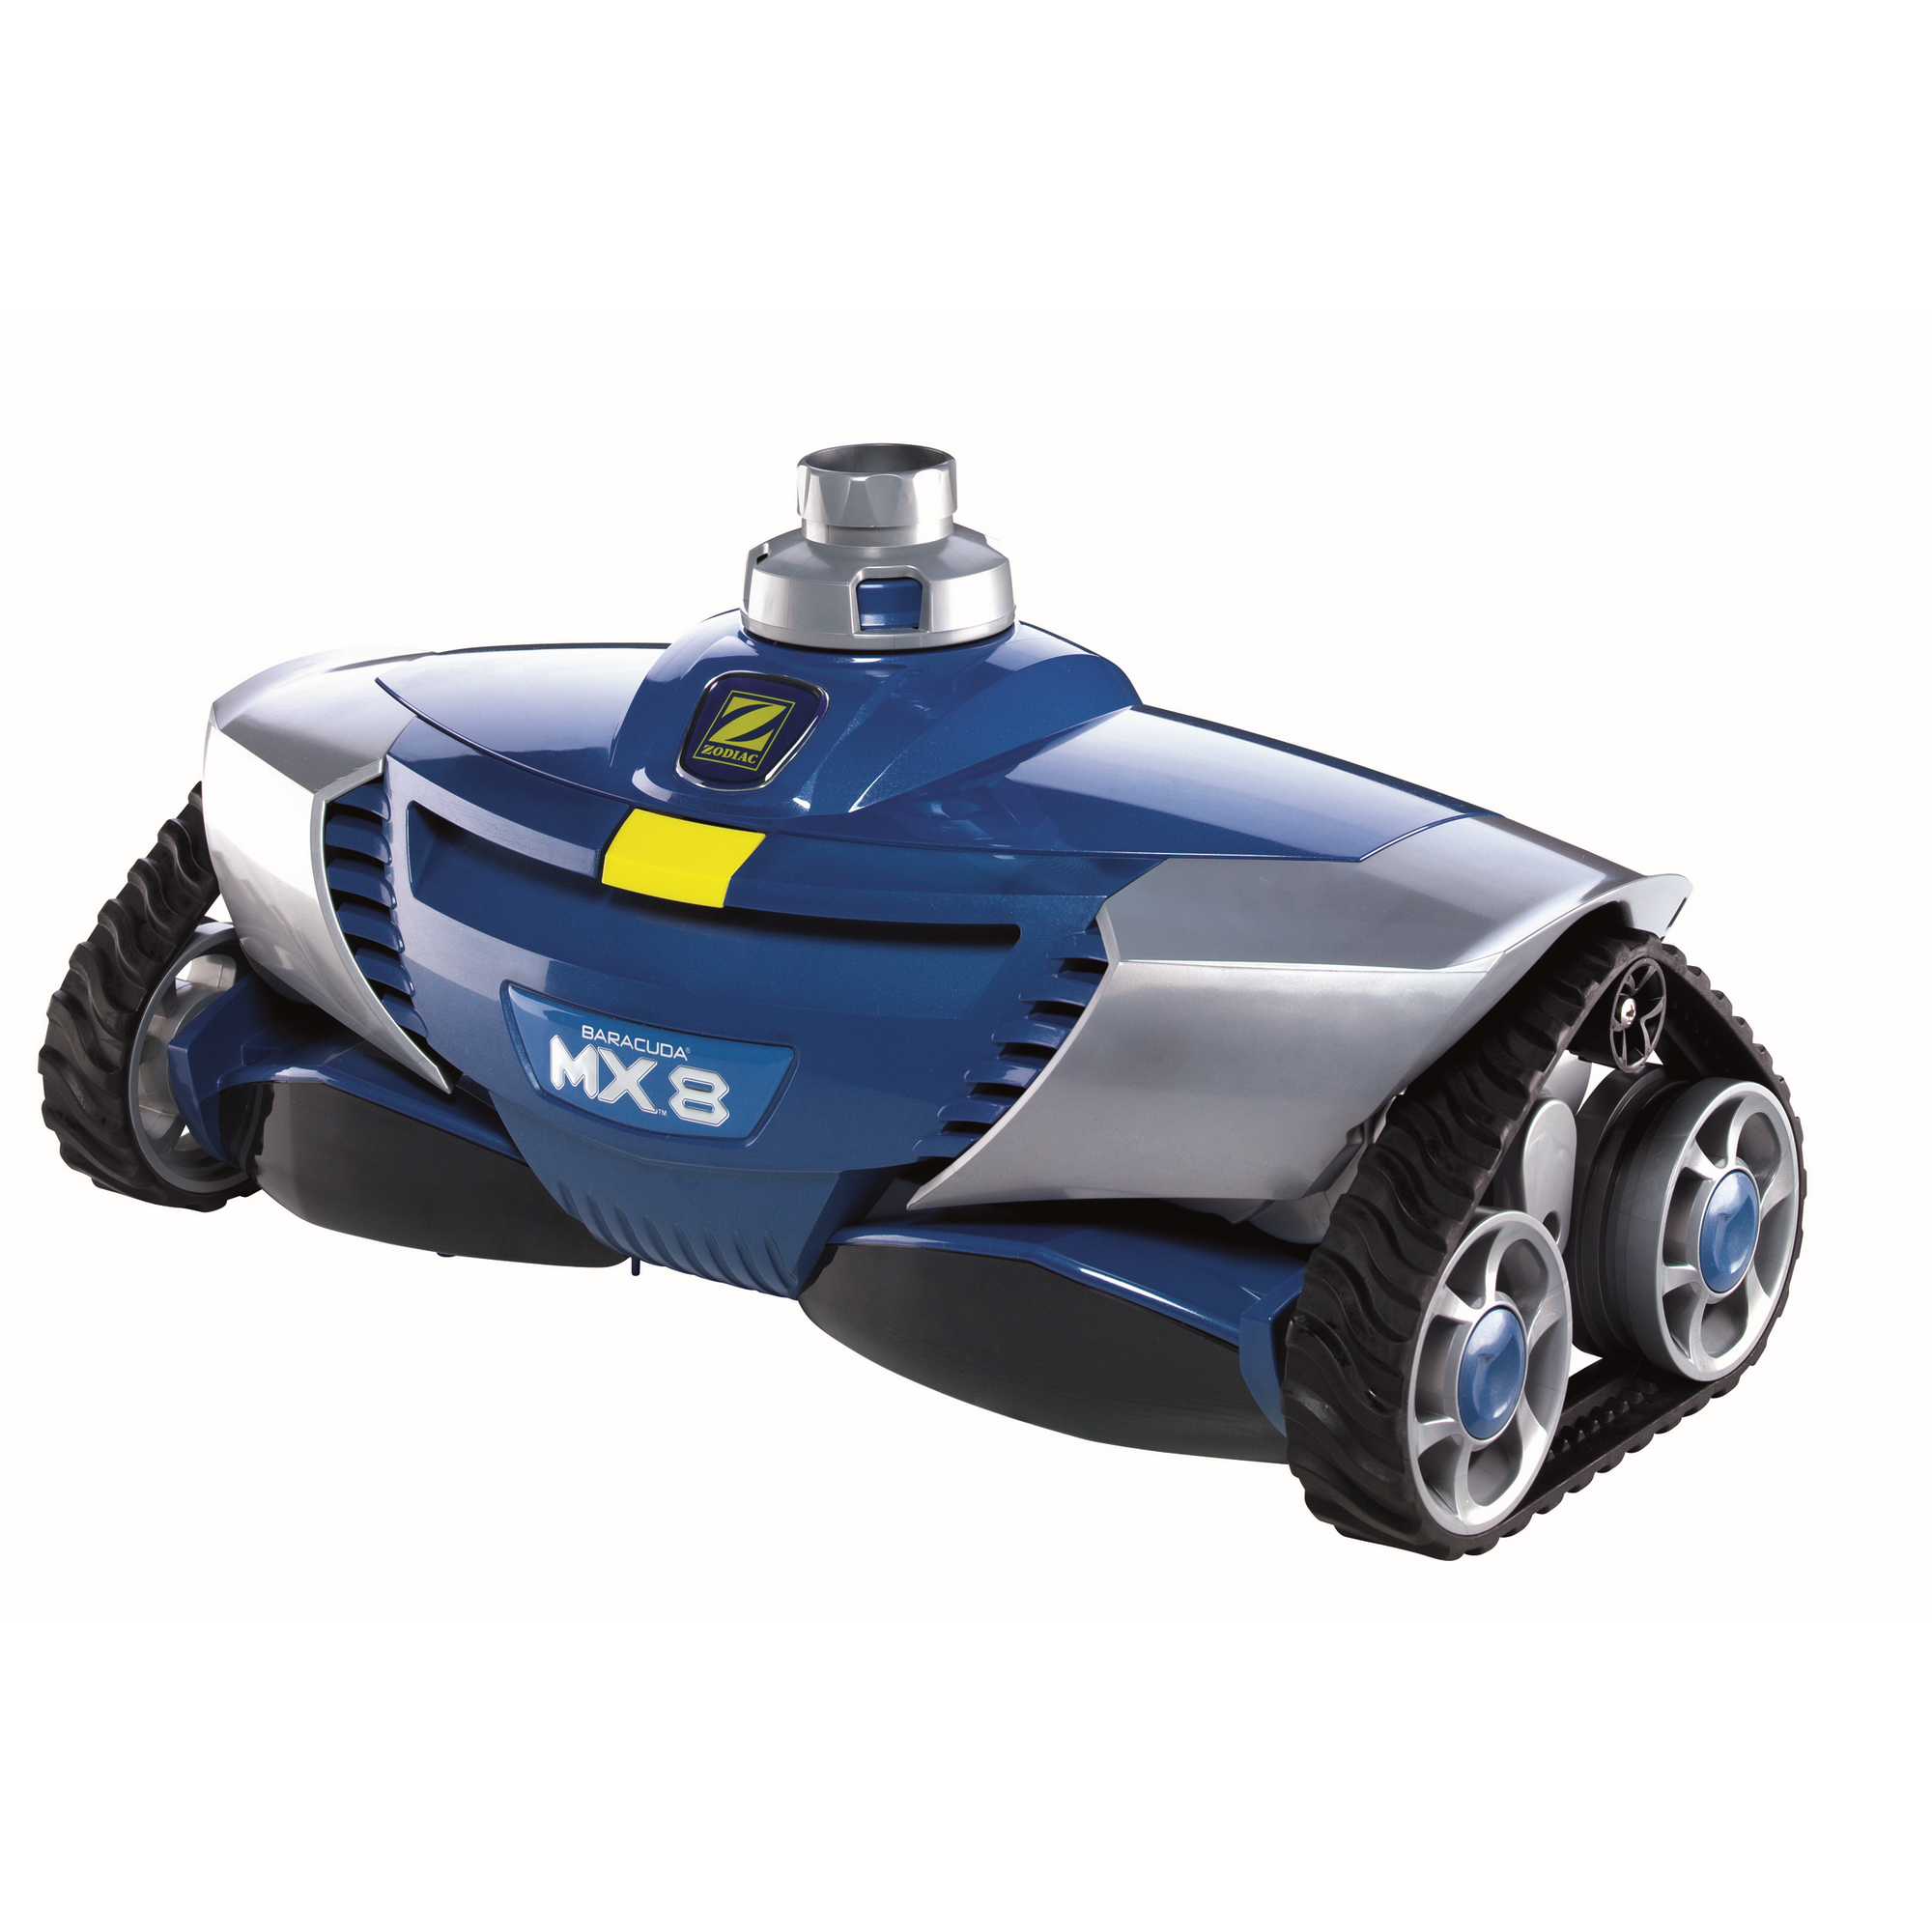 Poolroboter 'MX8' + product picture